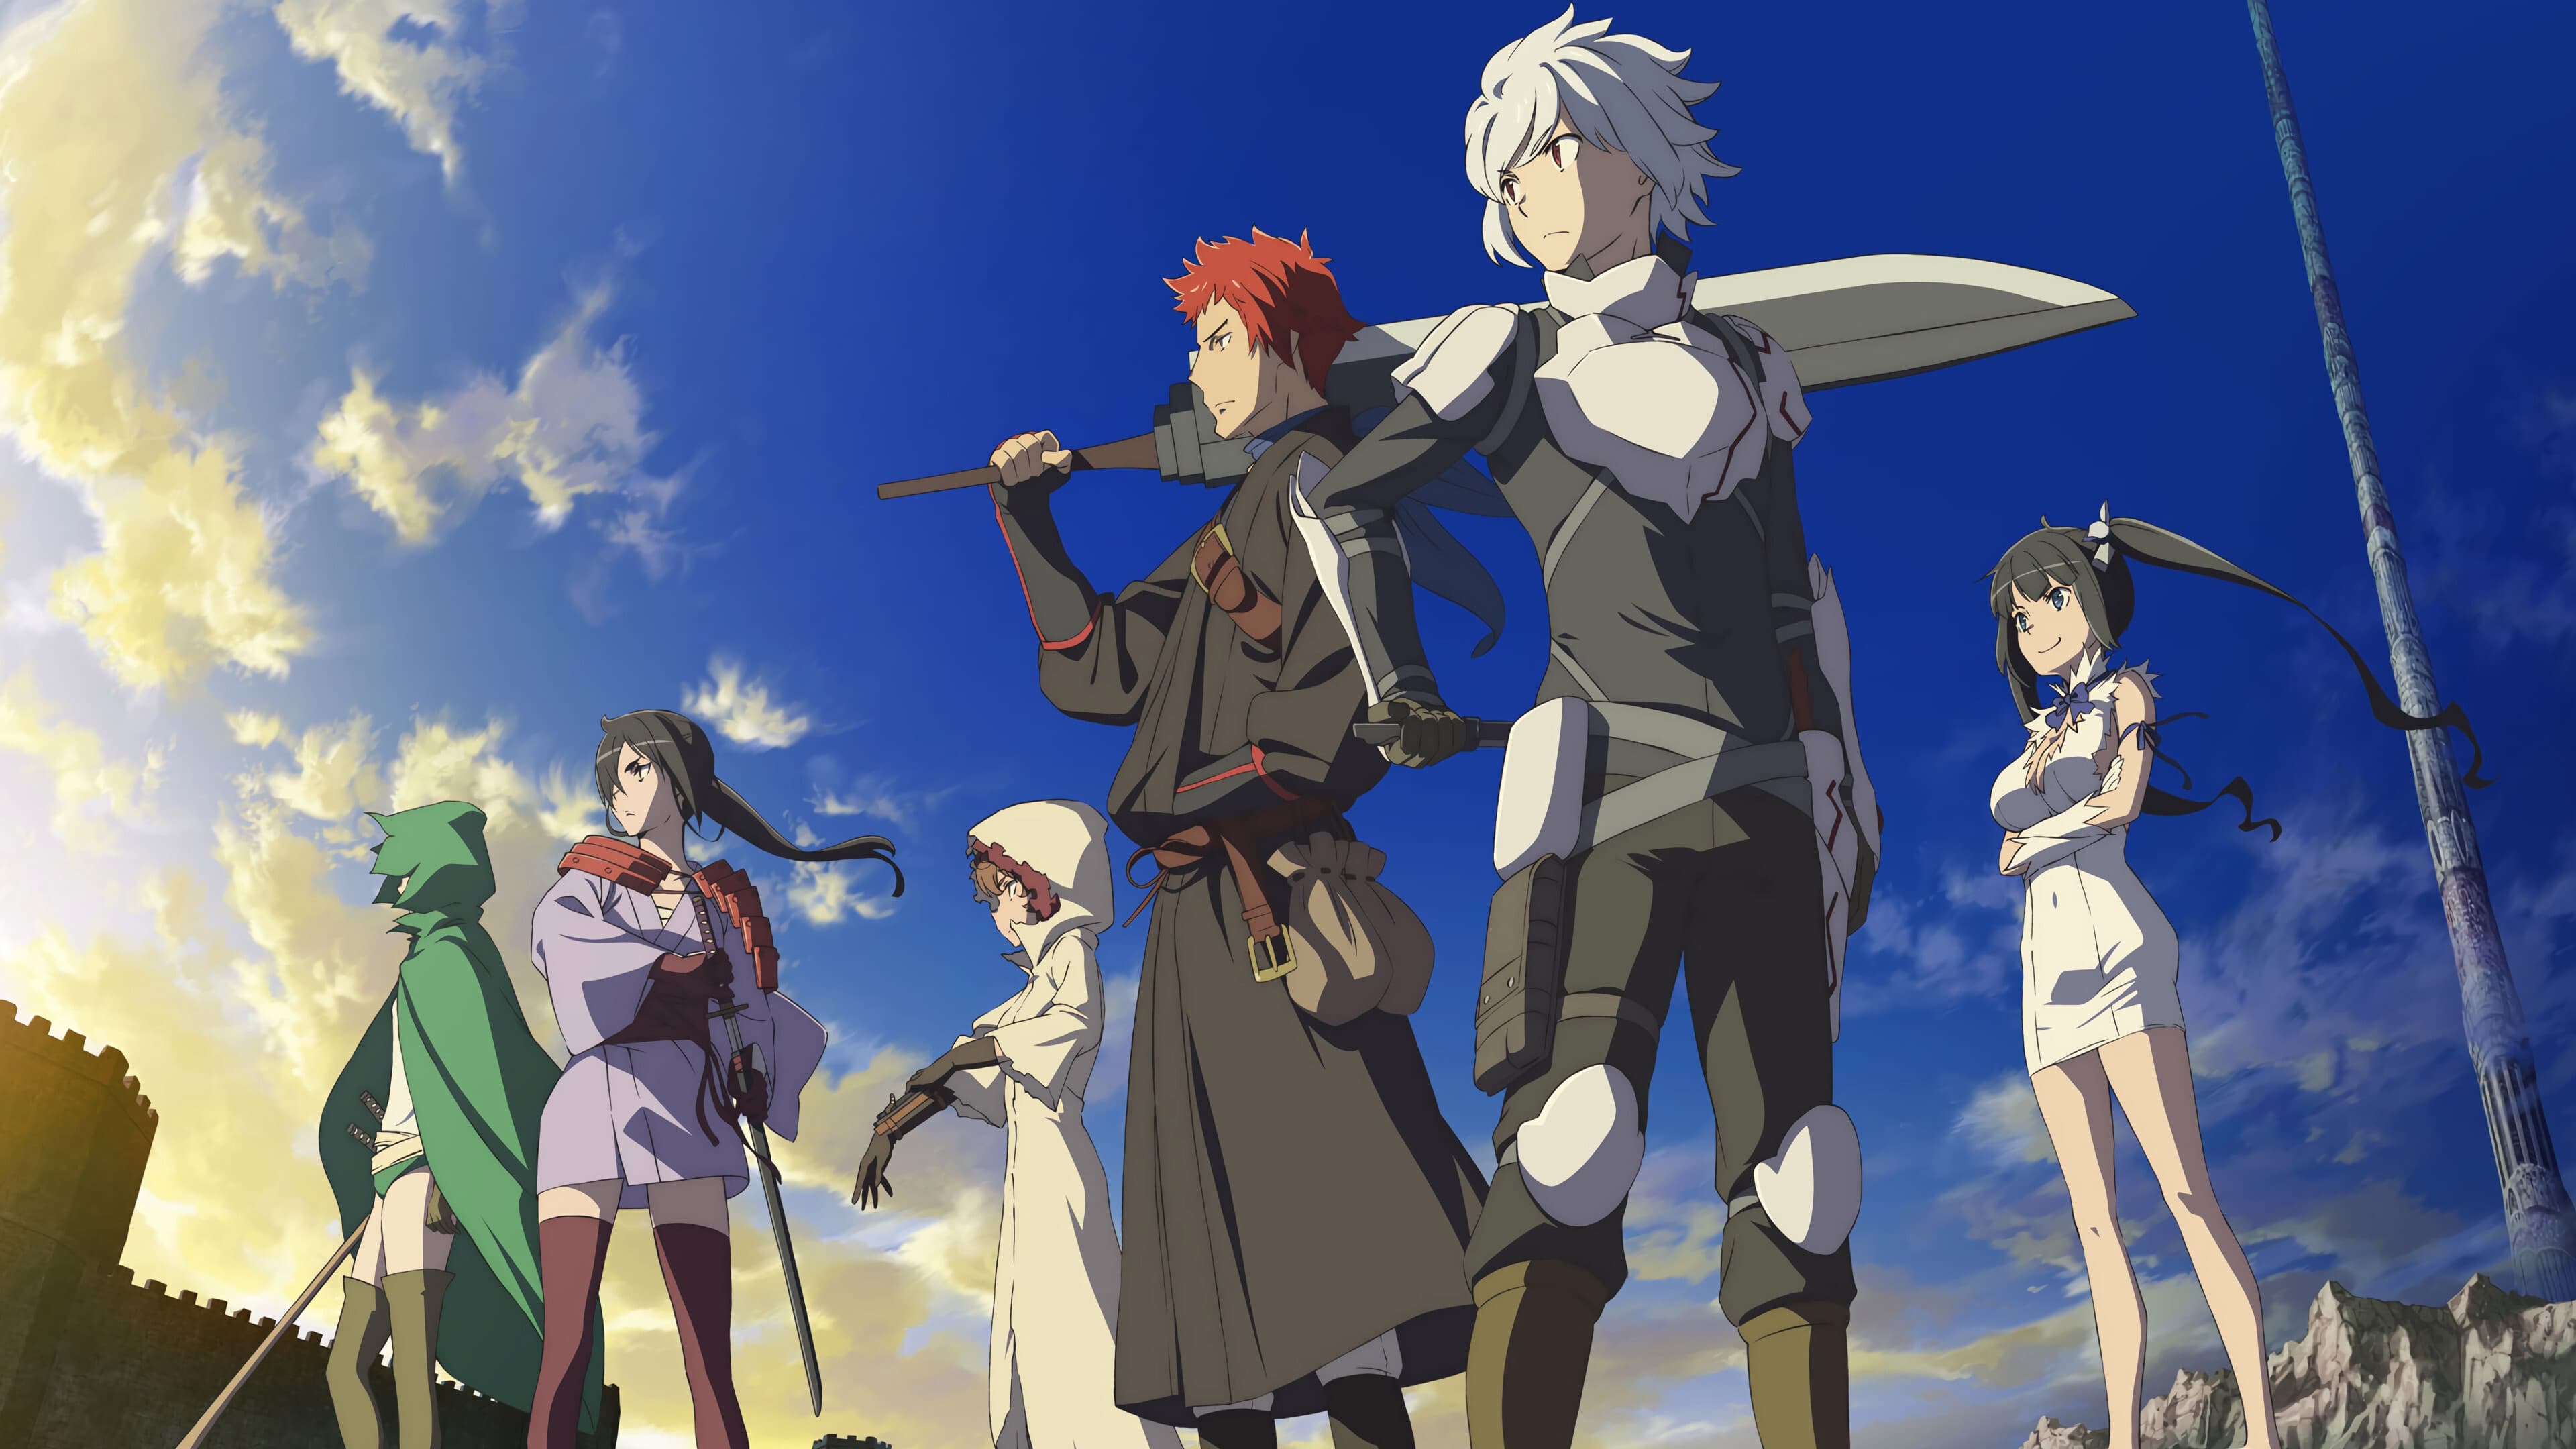 Watch Is It Wrong to Try to Pick Up Girls in a Dungeon? Online